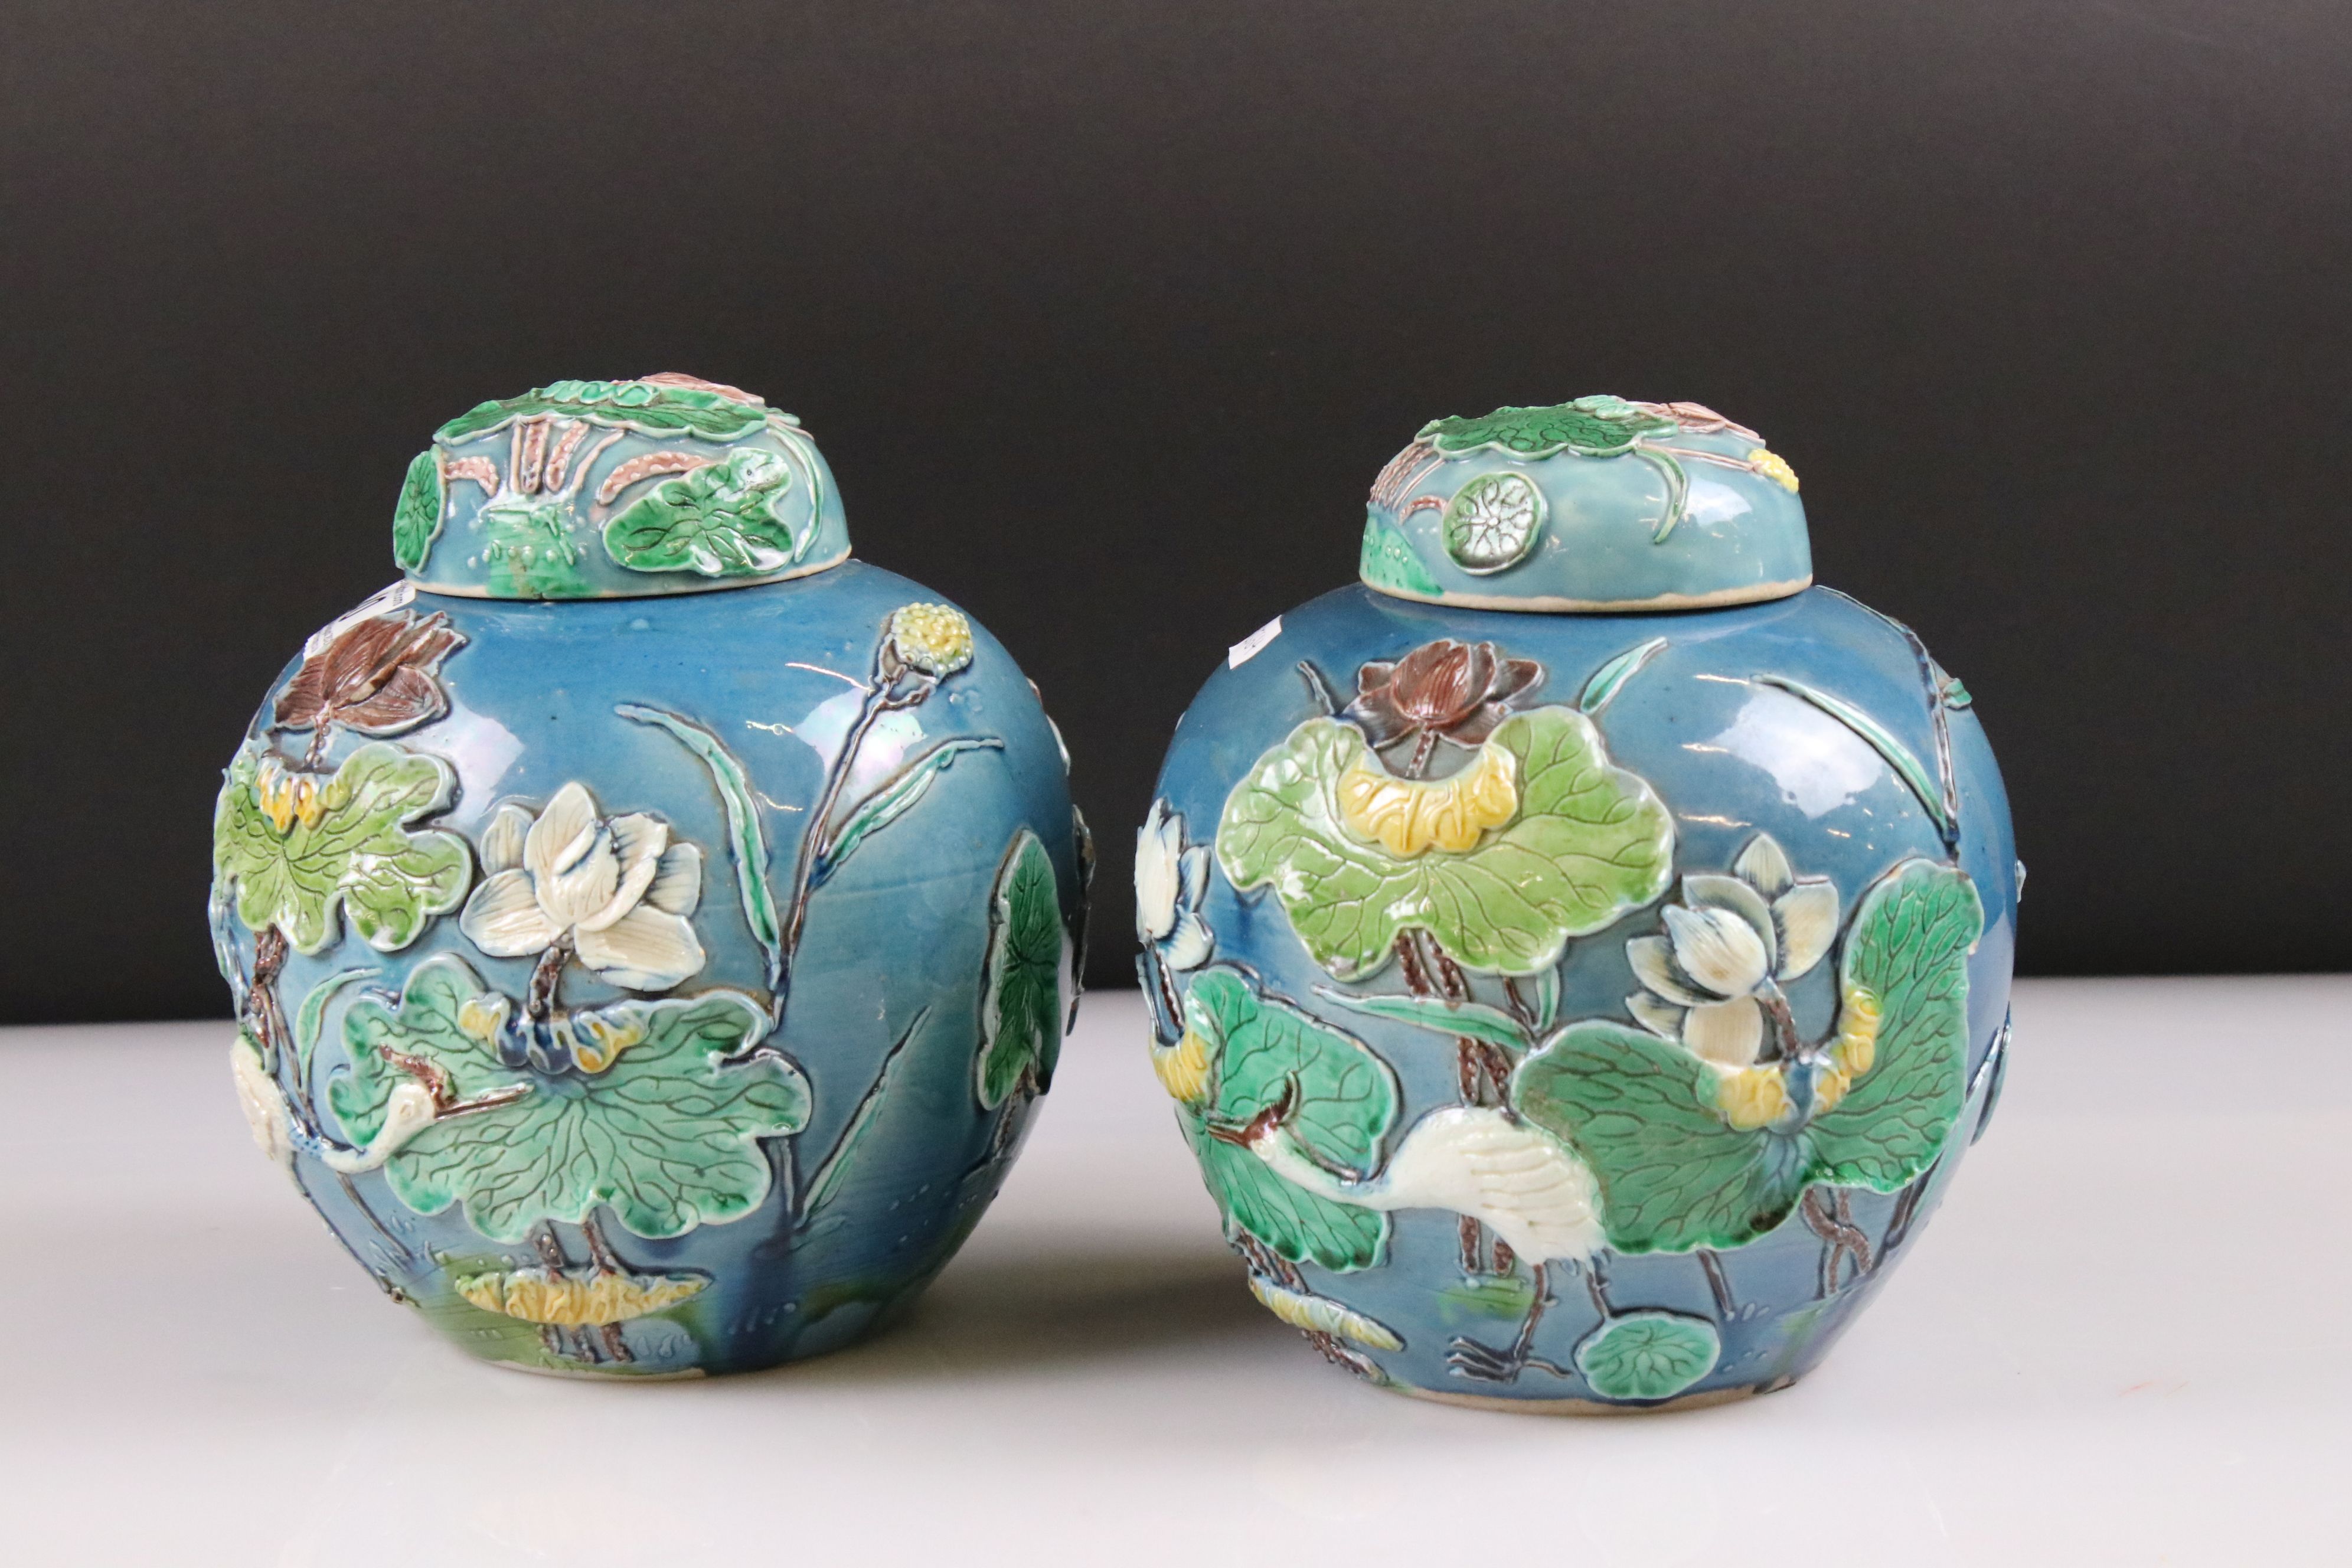 Pair of Chinese Porcelain ' Wang Bing Rong ' Ginger Jars and Covers with moulded relief decoration